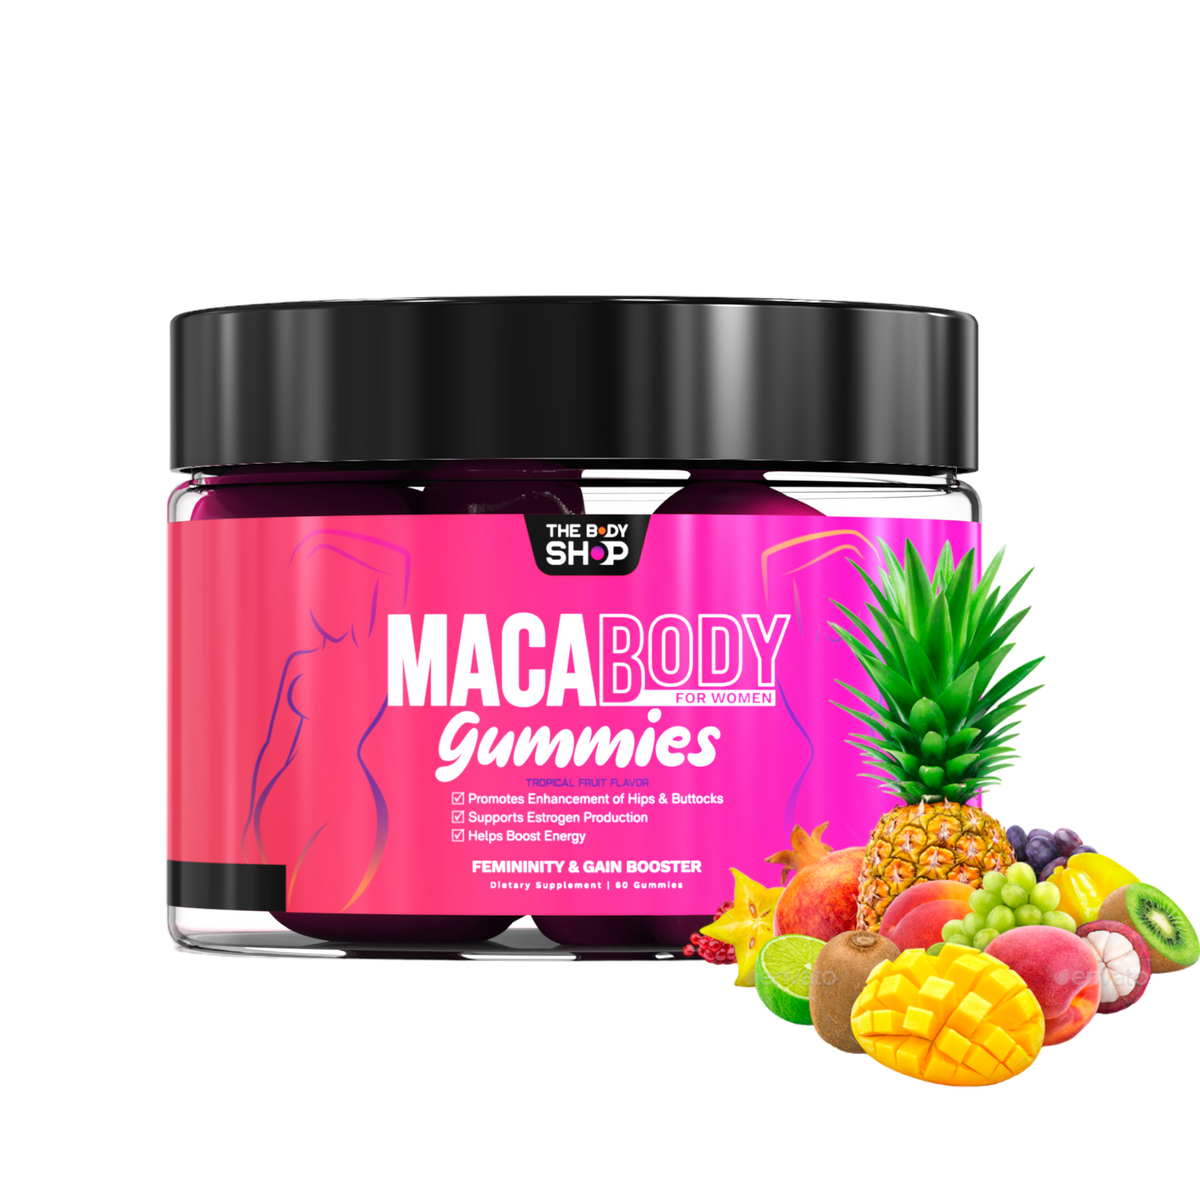 NEW FLAVOR! TROPICAL FRUIT MACABODY Gain Booster Gummies(Month Supply)